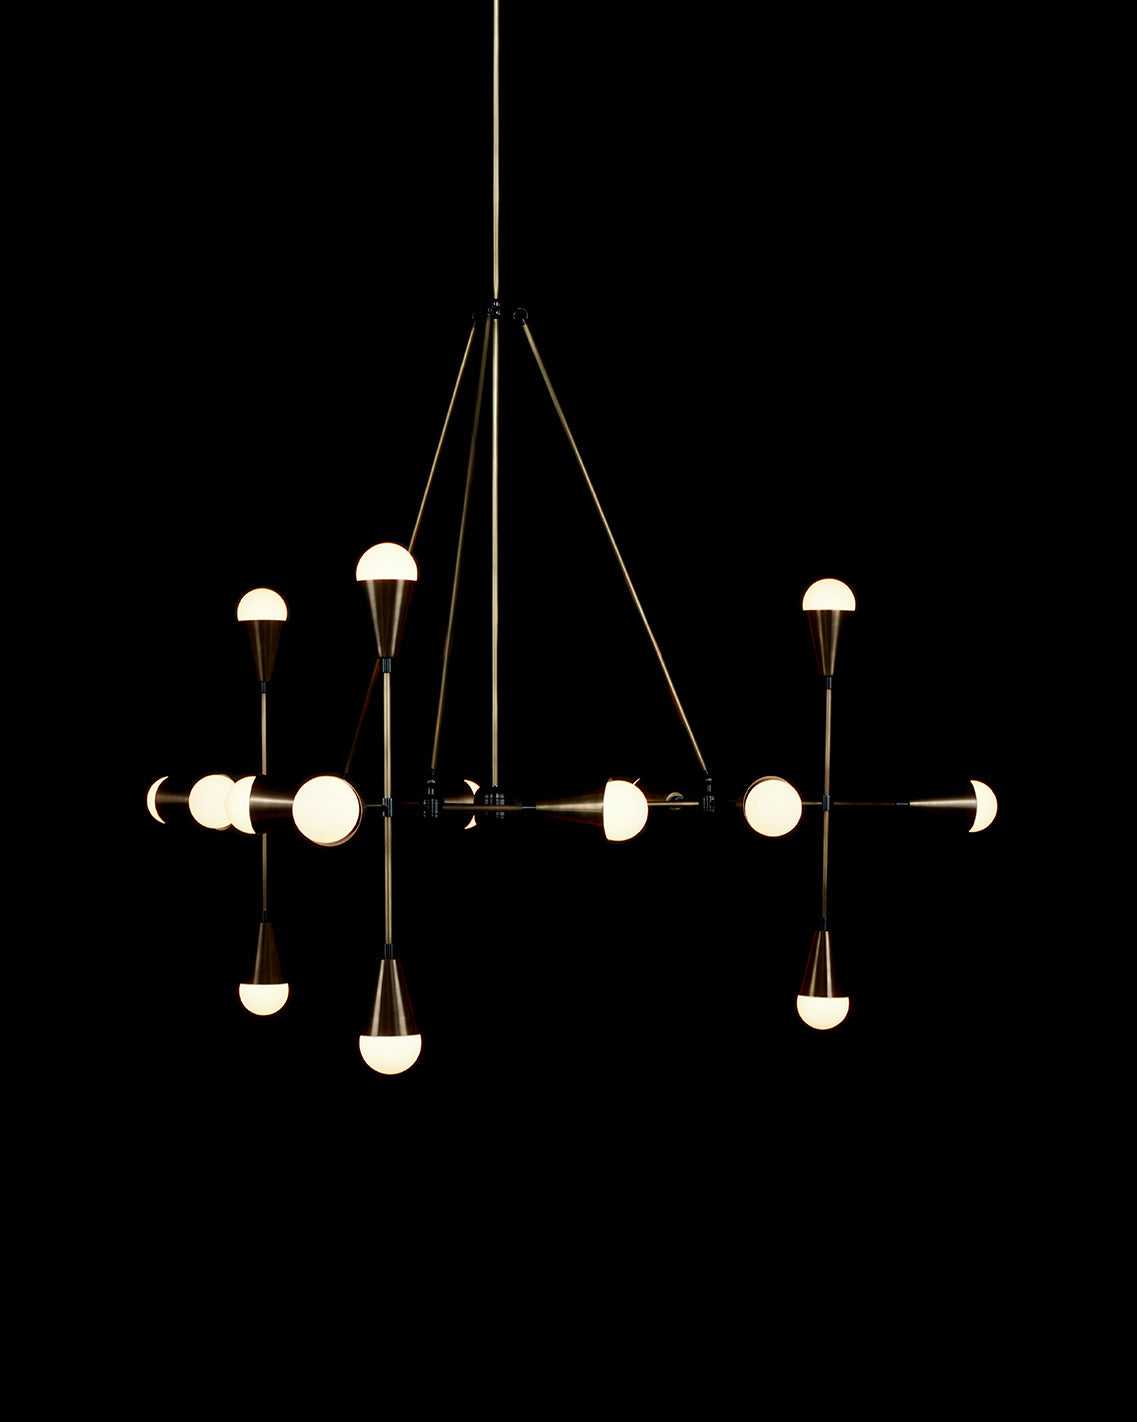 TRIAD : 15 ceiling pendant in Aged Brass and Blackened Brass finish, hanging against a black background. 